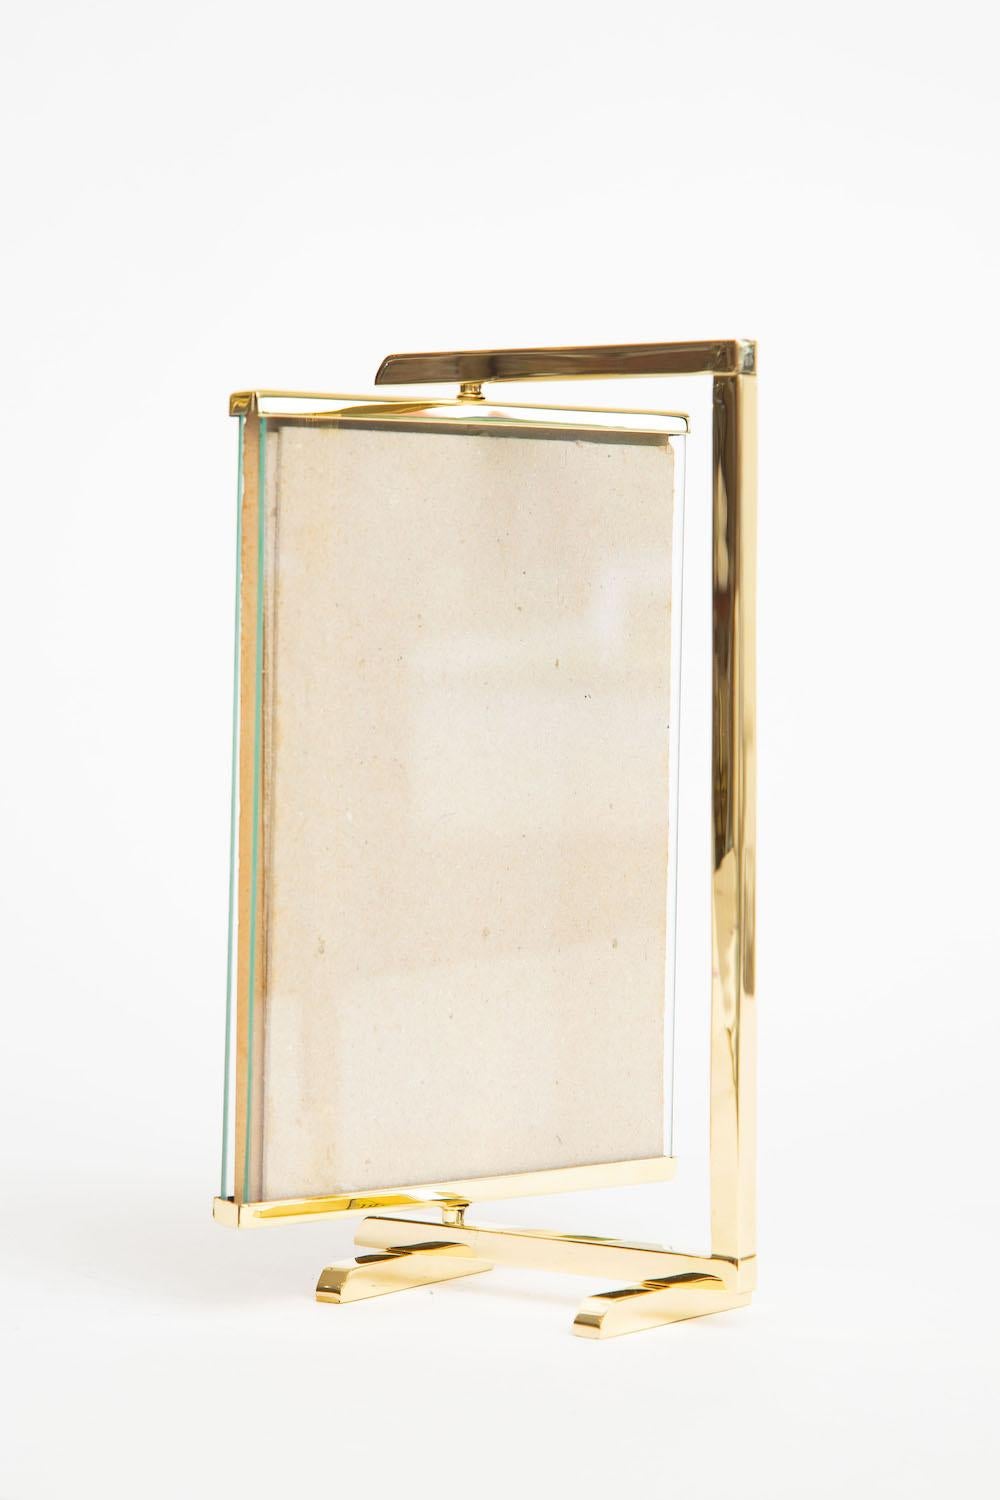 This vintage bronze fully polished picture frame is Mid-Century Modern and swivels and pivots to two sides for 2 photographs. It was made by Silvestri Company and still retains that piece of paper in the frame. It is elegant, simple and modern. It